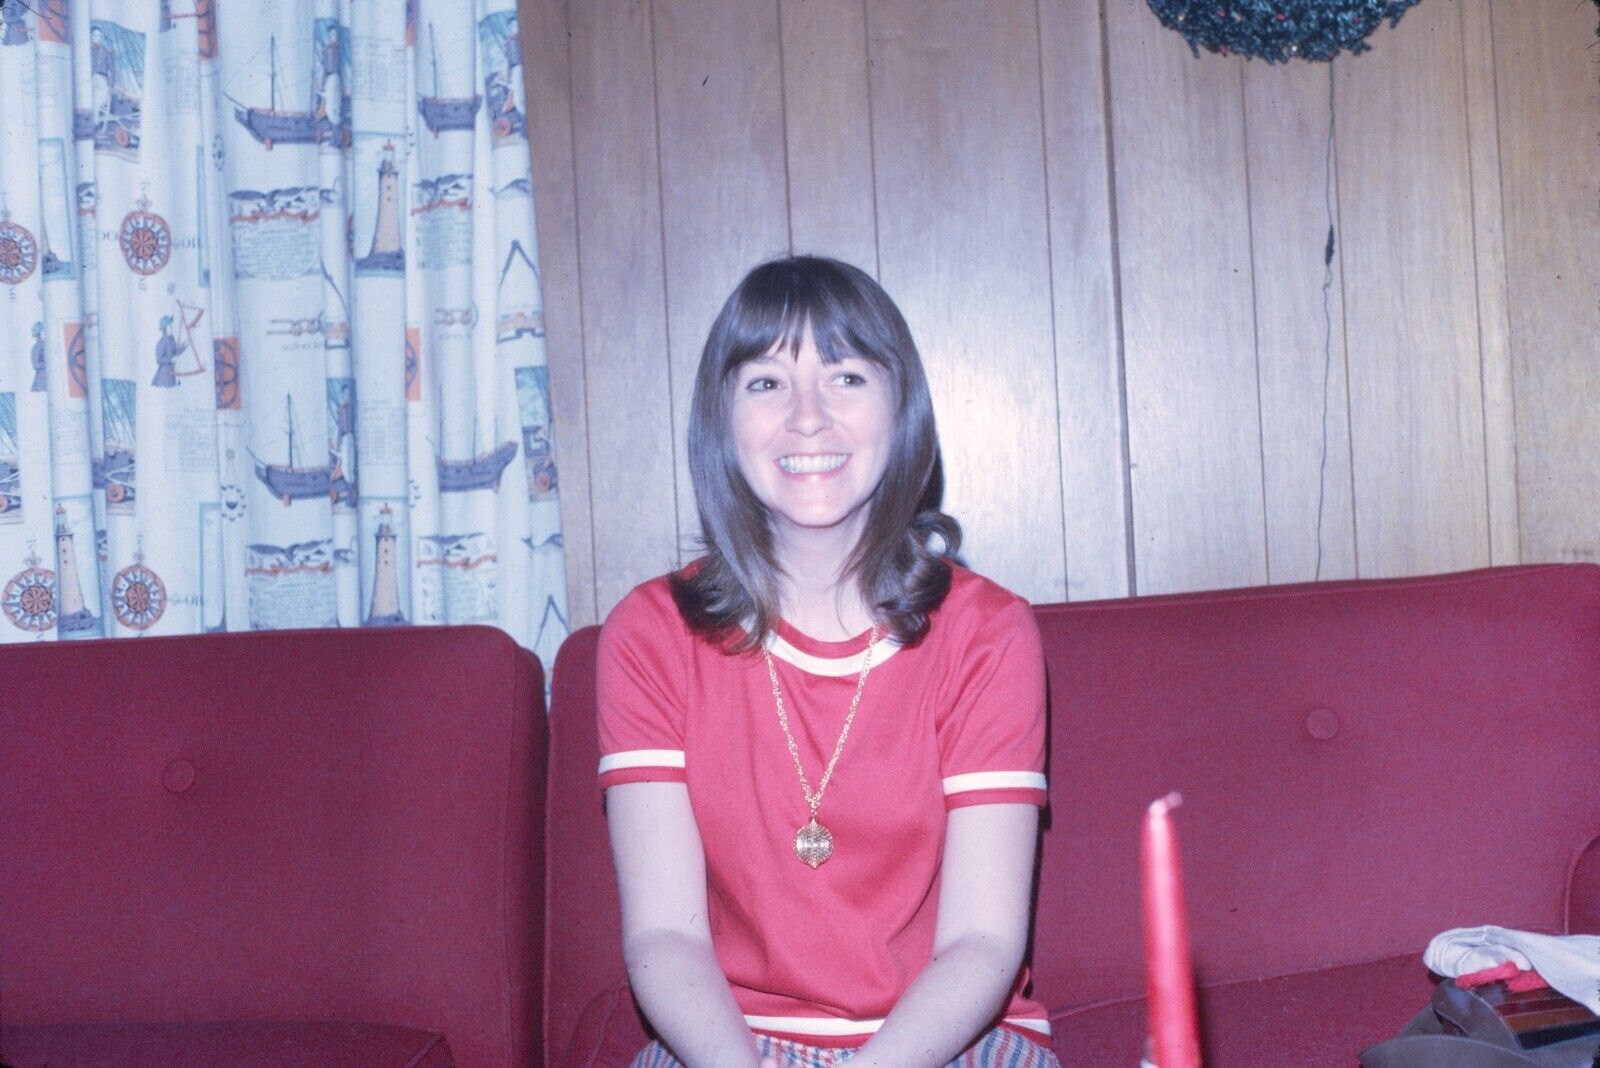 1972 Young Woman Smiling on Couch Vintage 35mm Slide